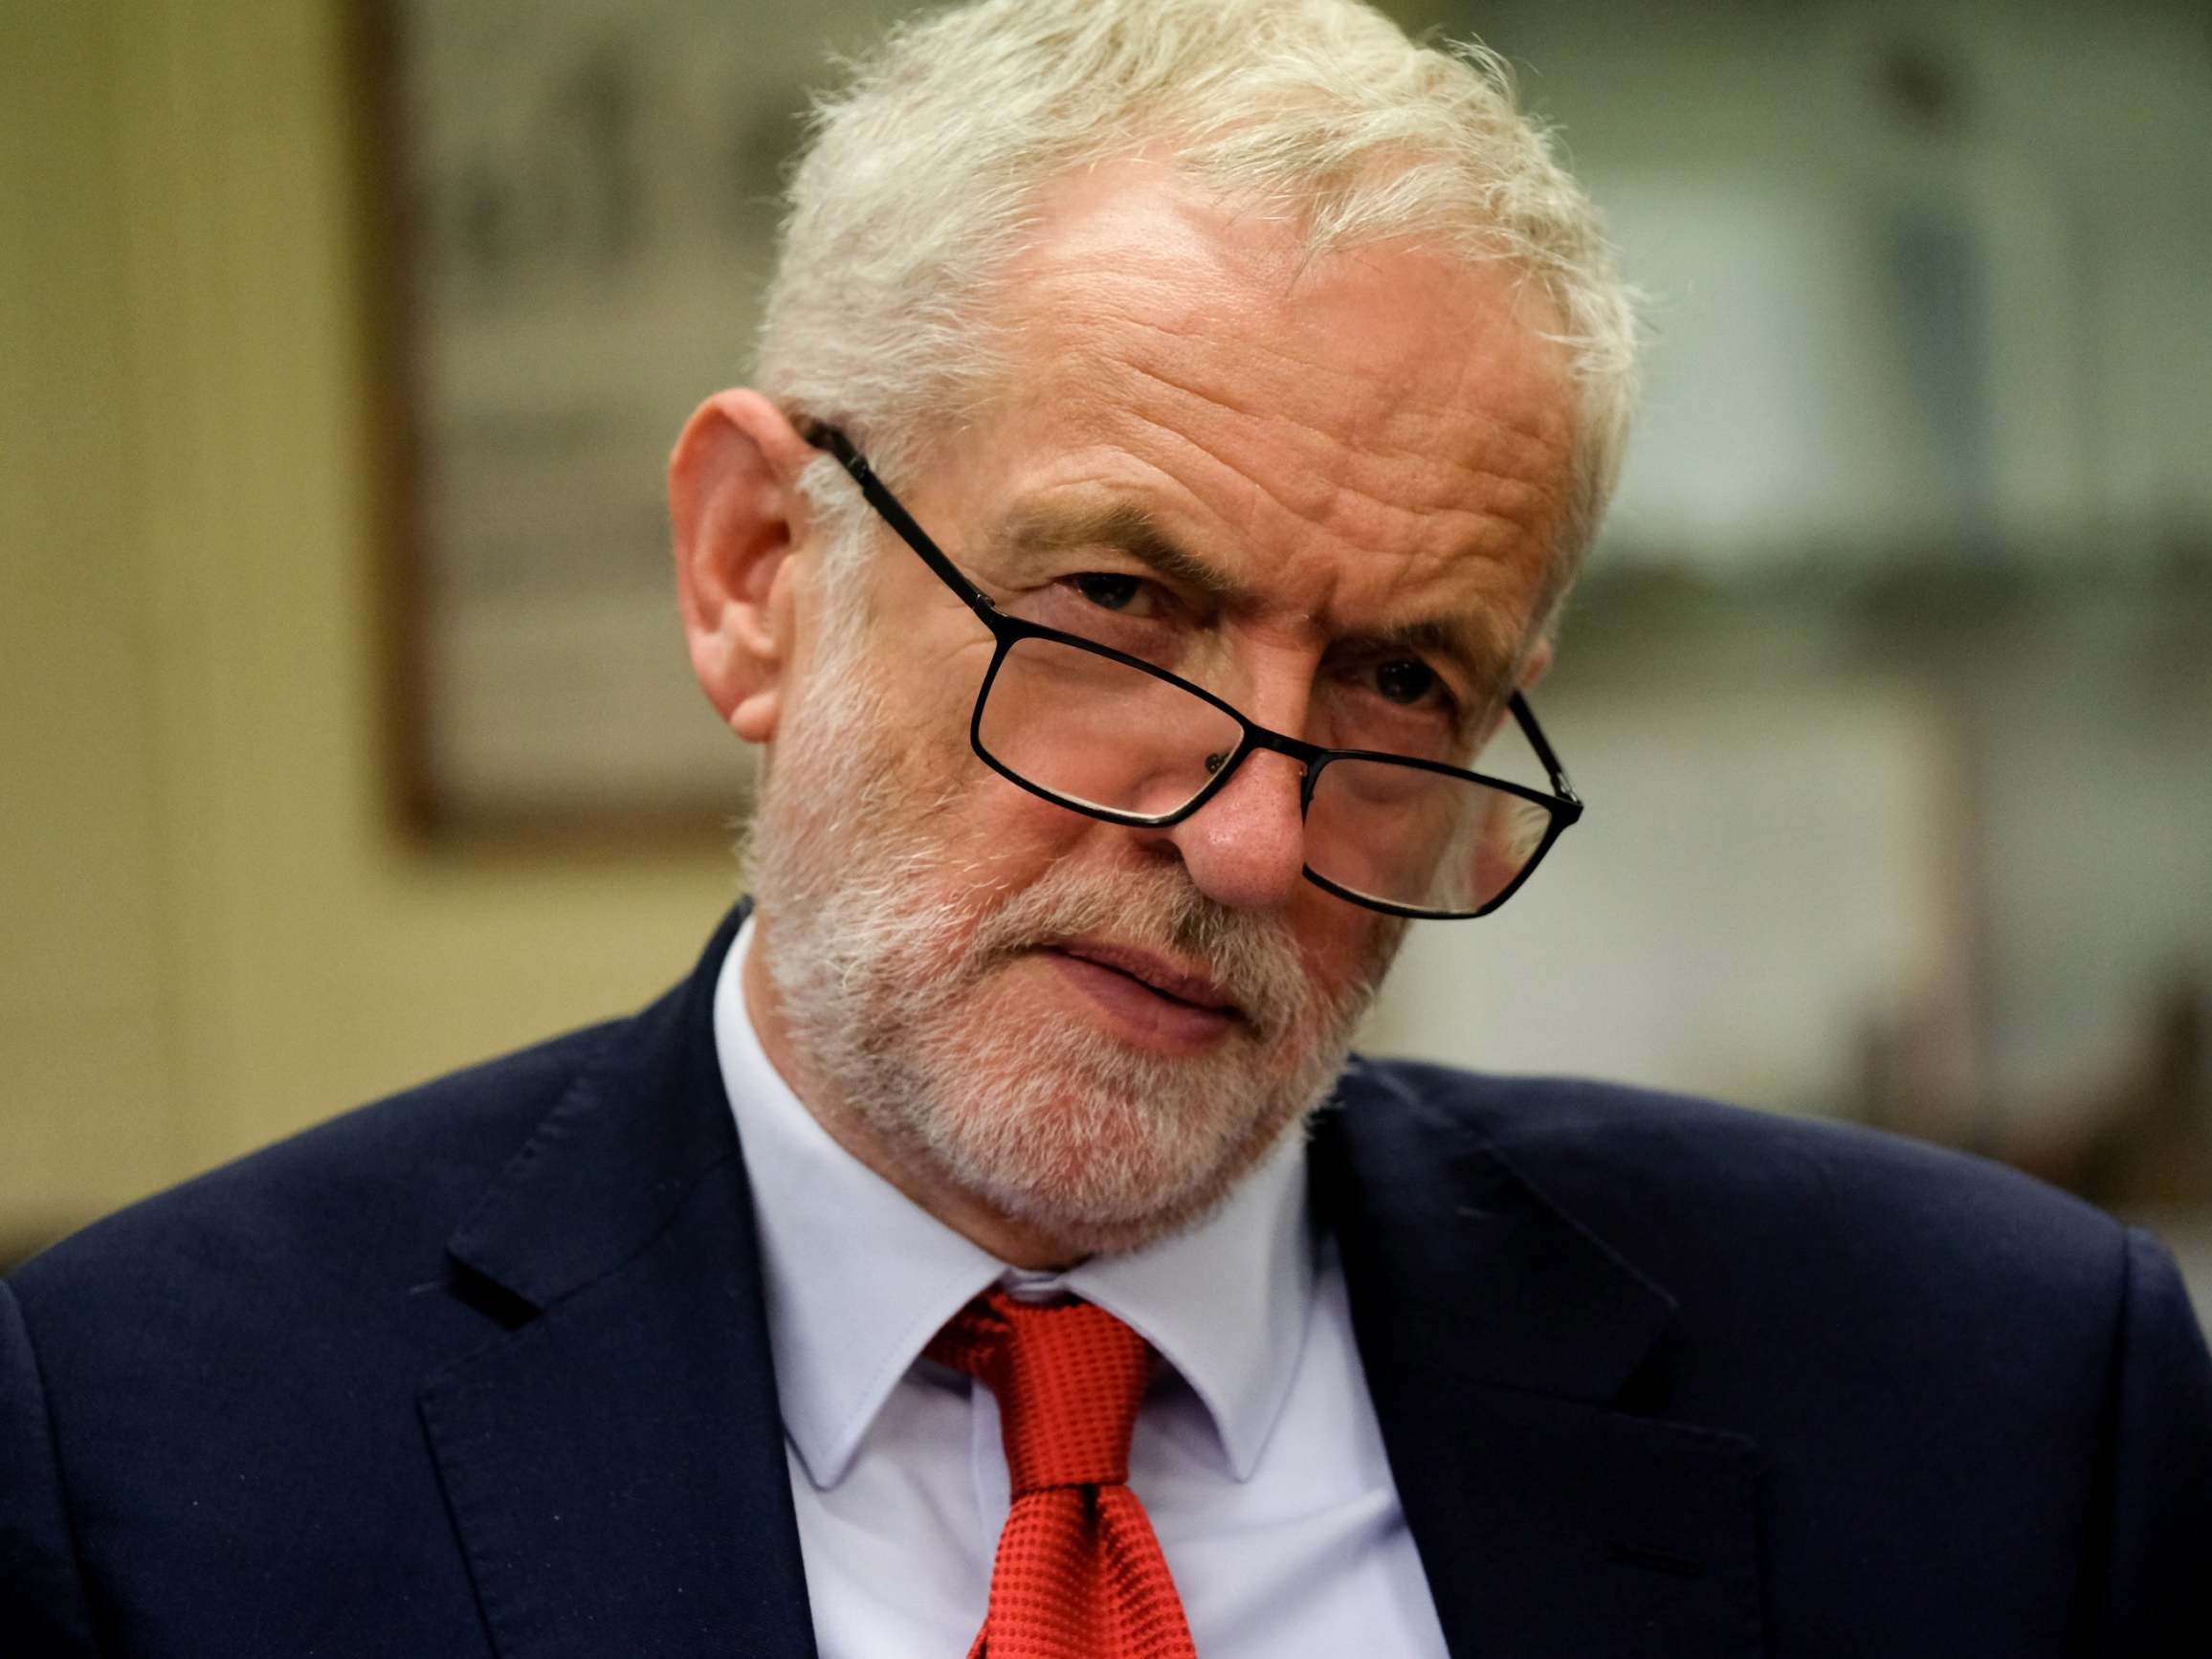 The buck for Labour's antisemitism crisis stops with Corbyn – he has to go